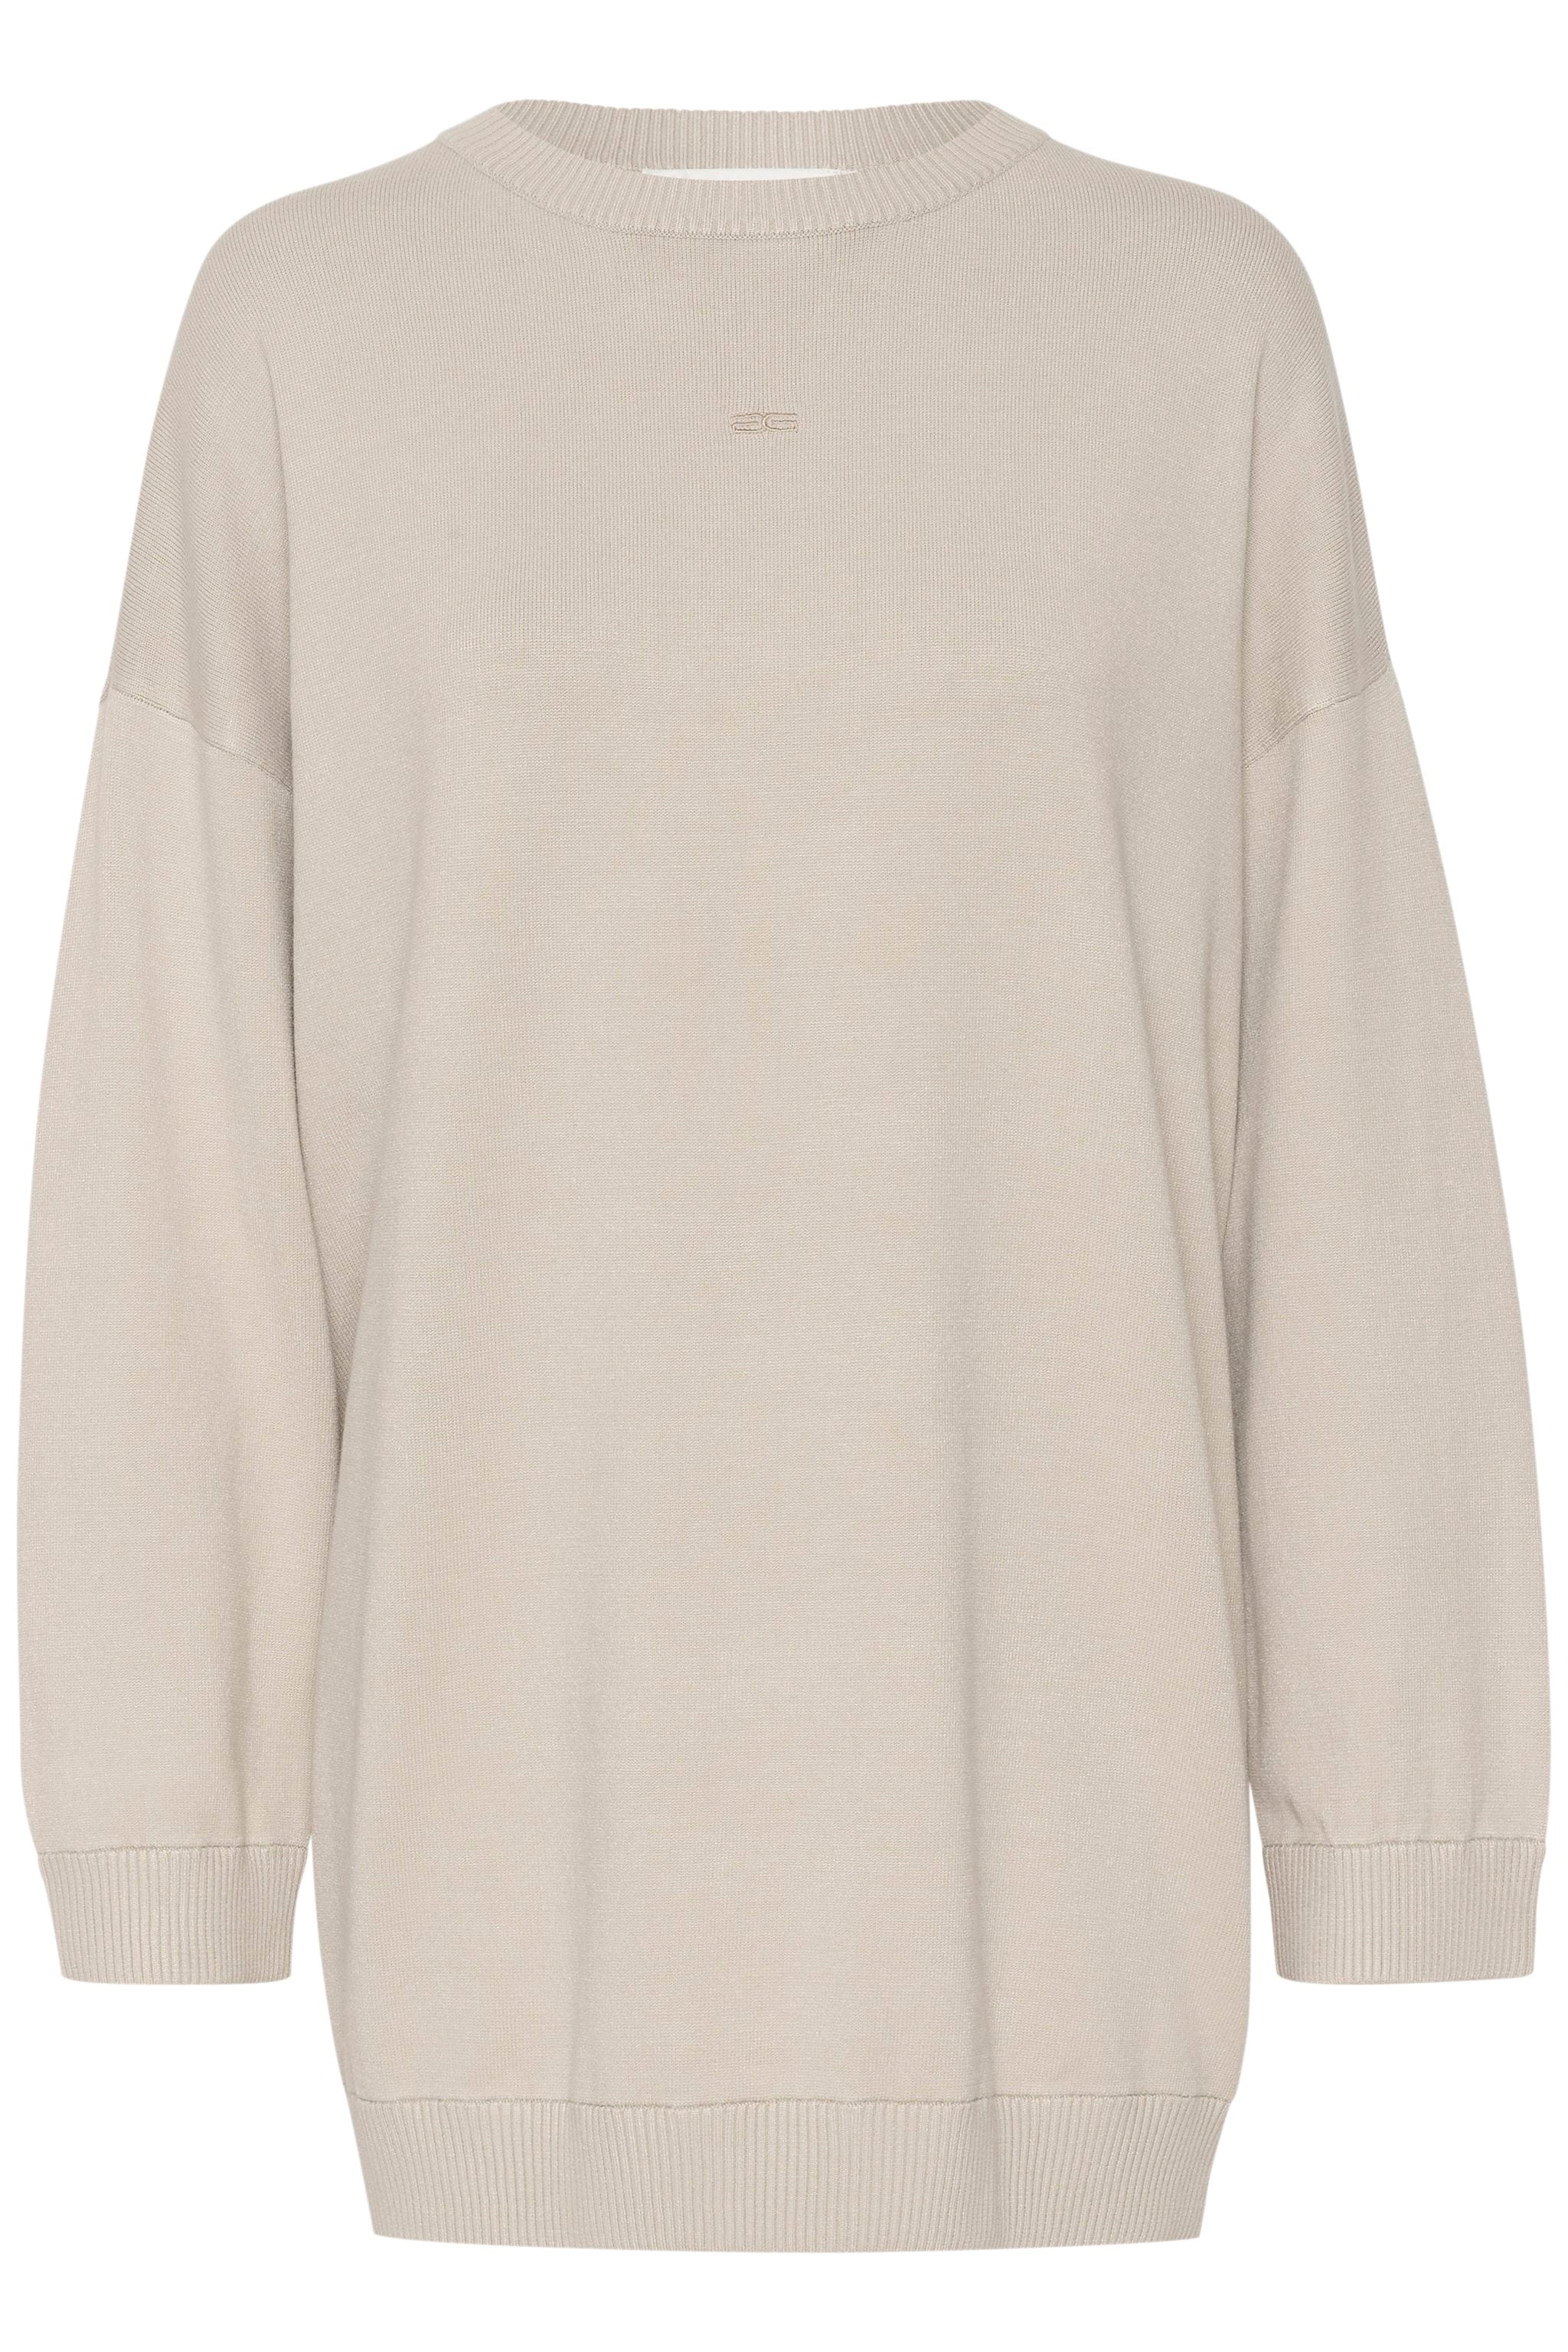 AYAGZ PULLOVER  - ISLAND FOSSIL